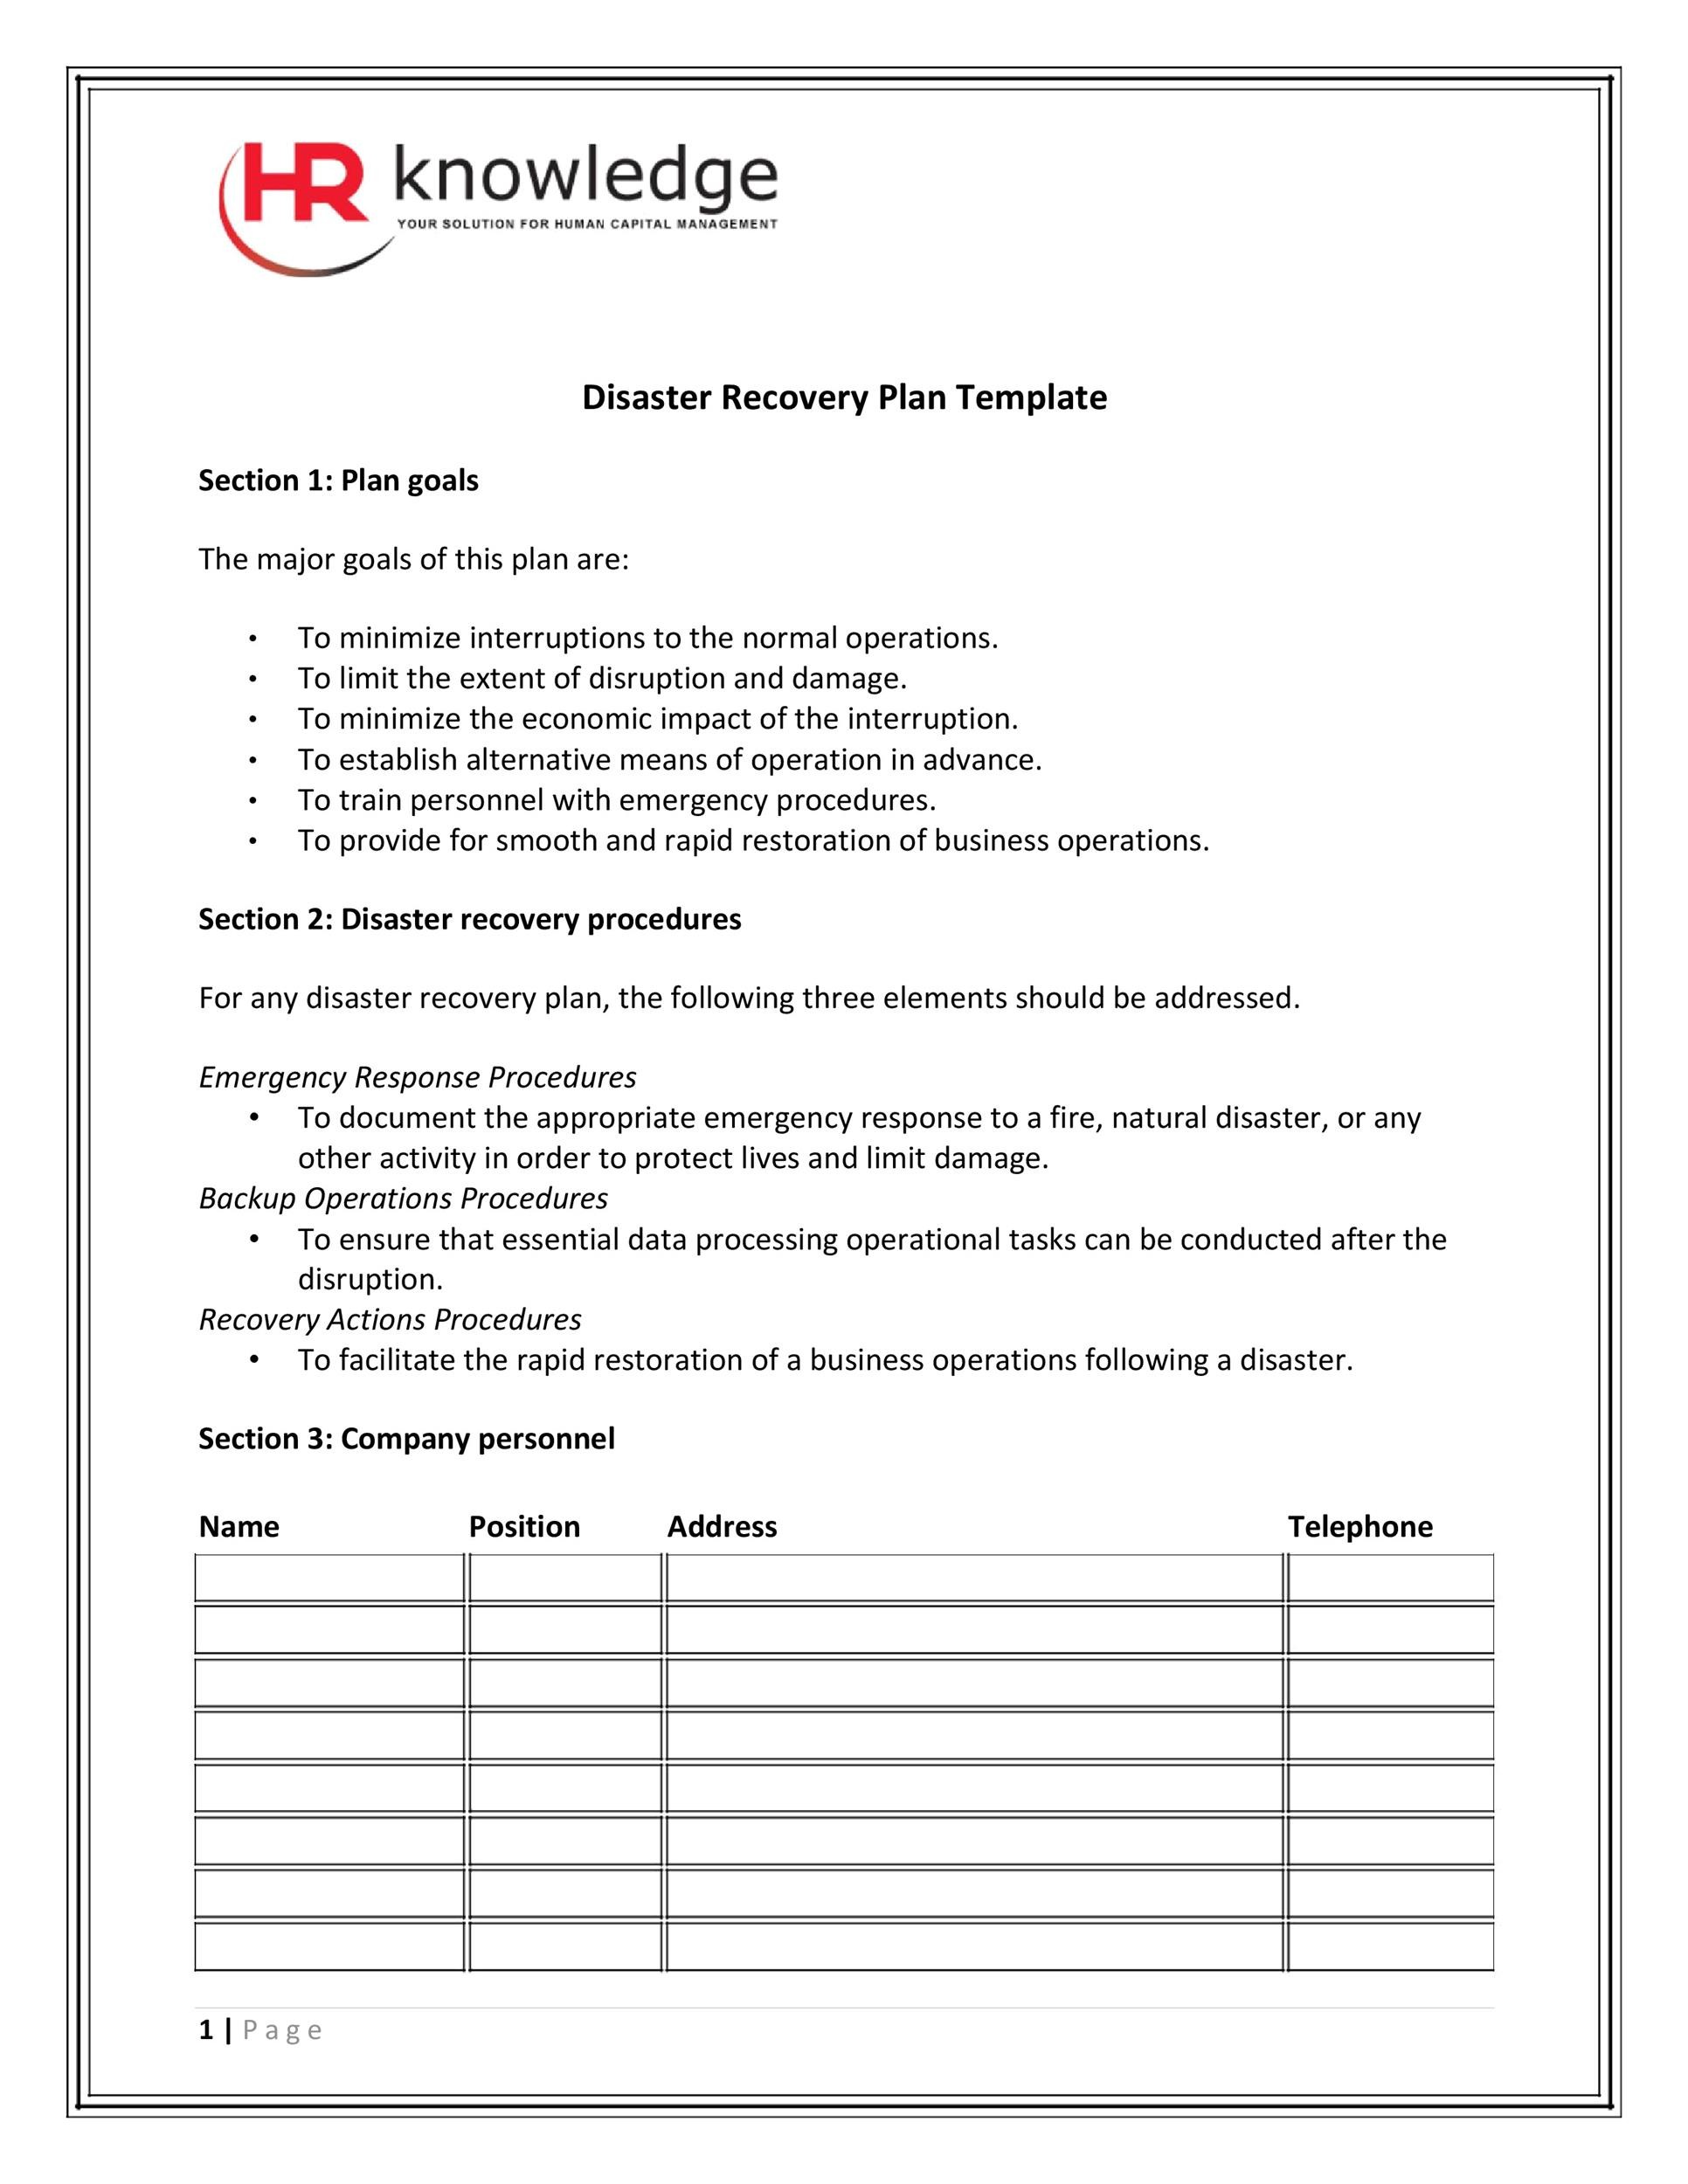 Disaster Recovery Playbook Template Images All Disaster Msimages Org